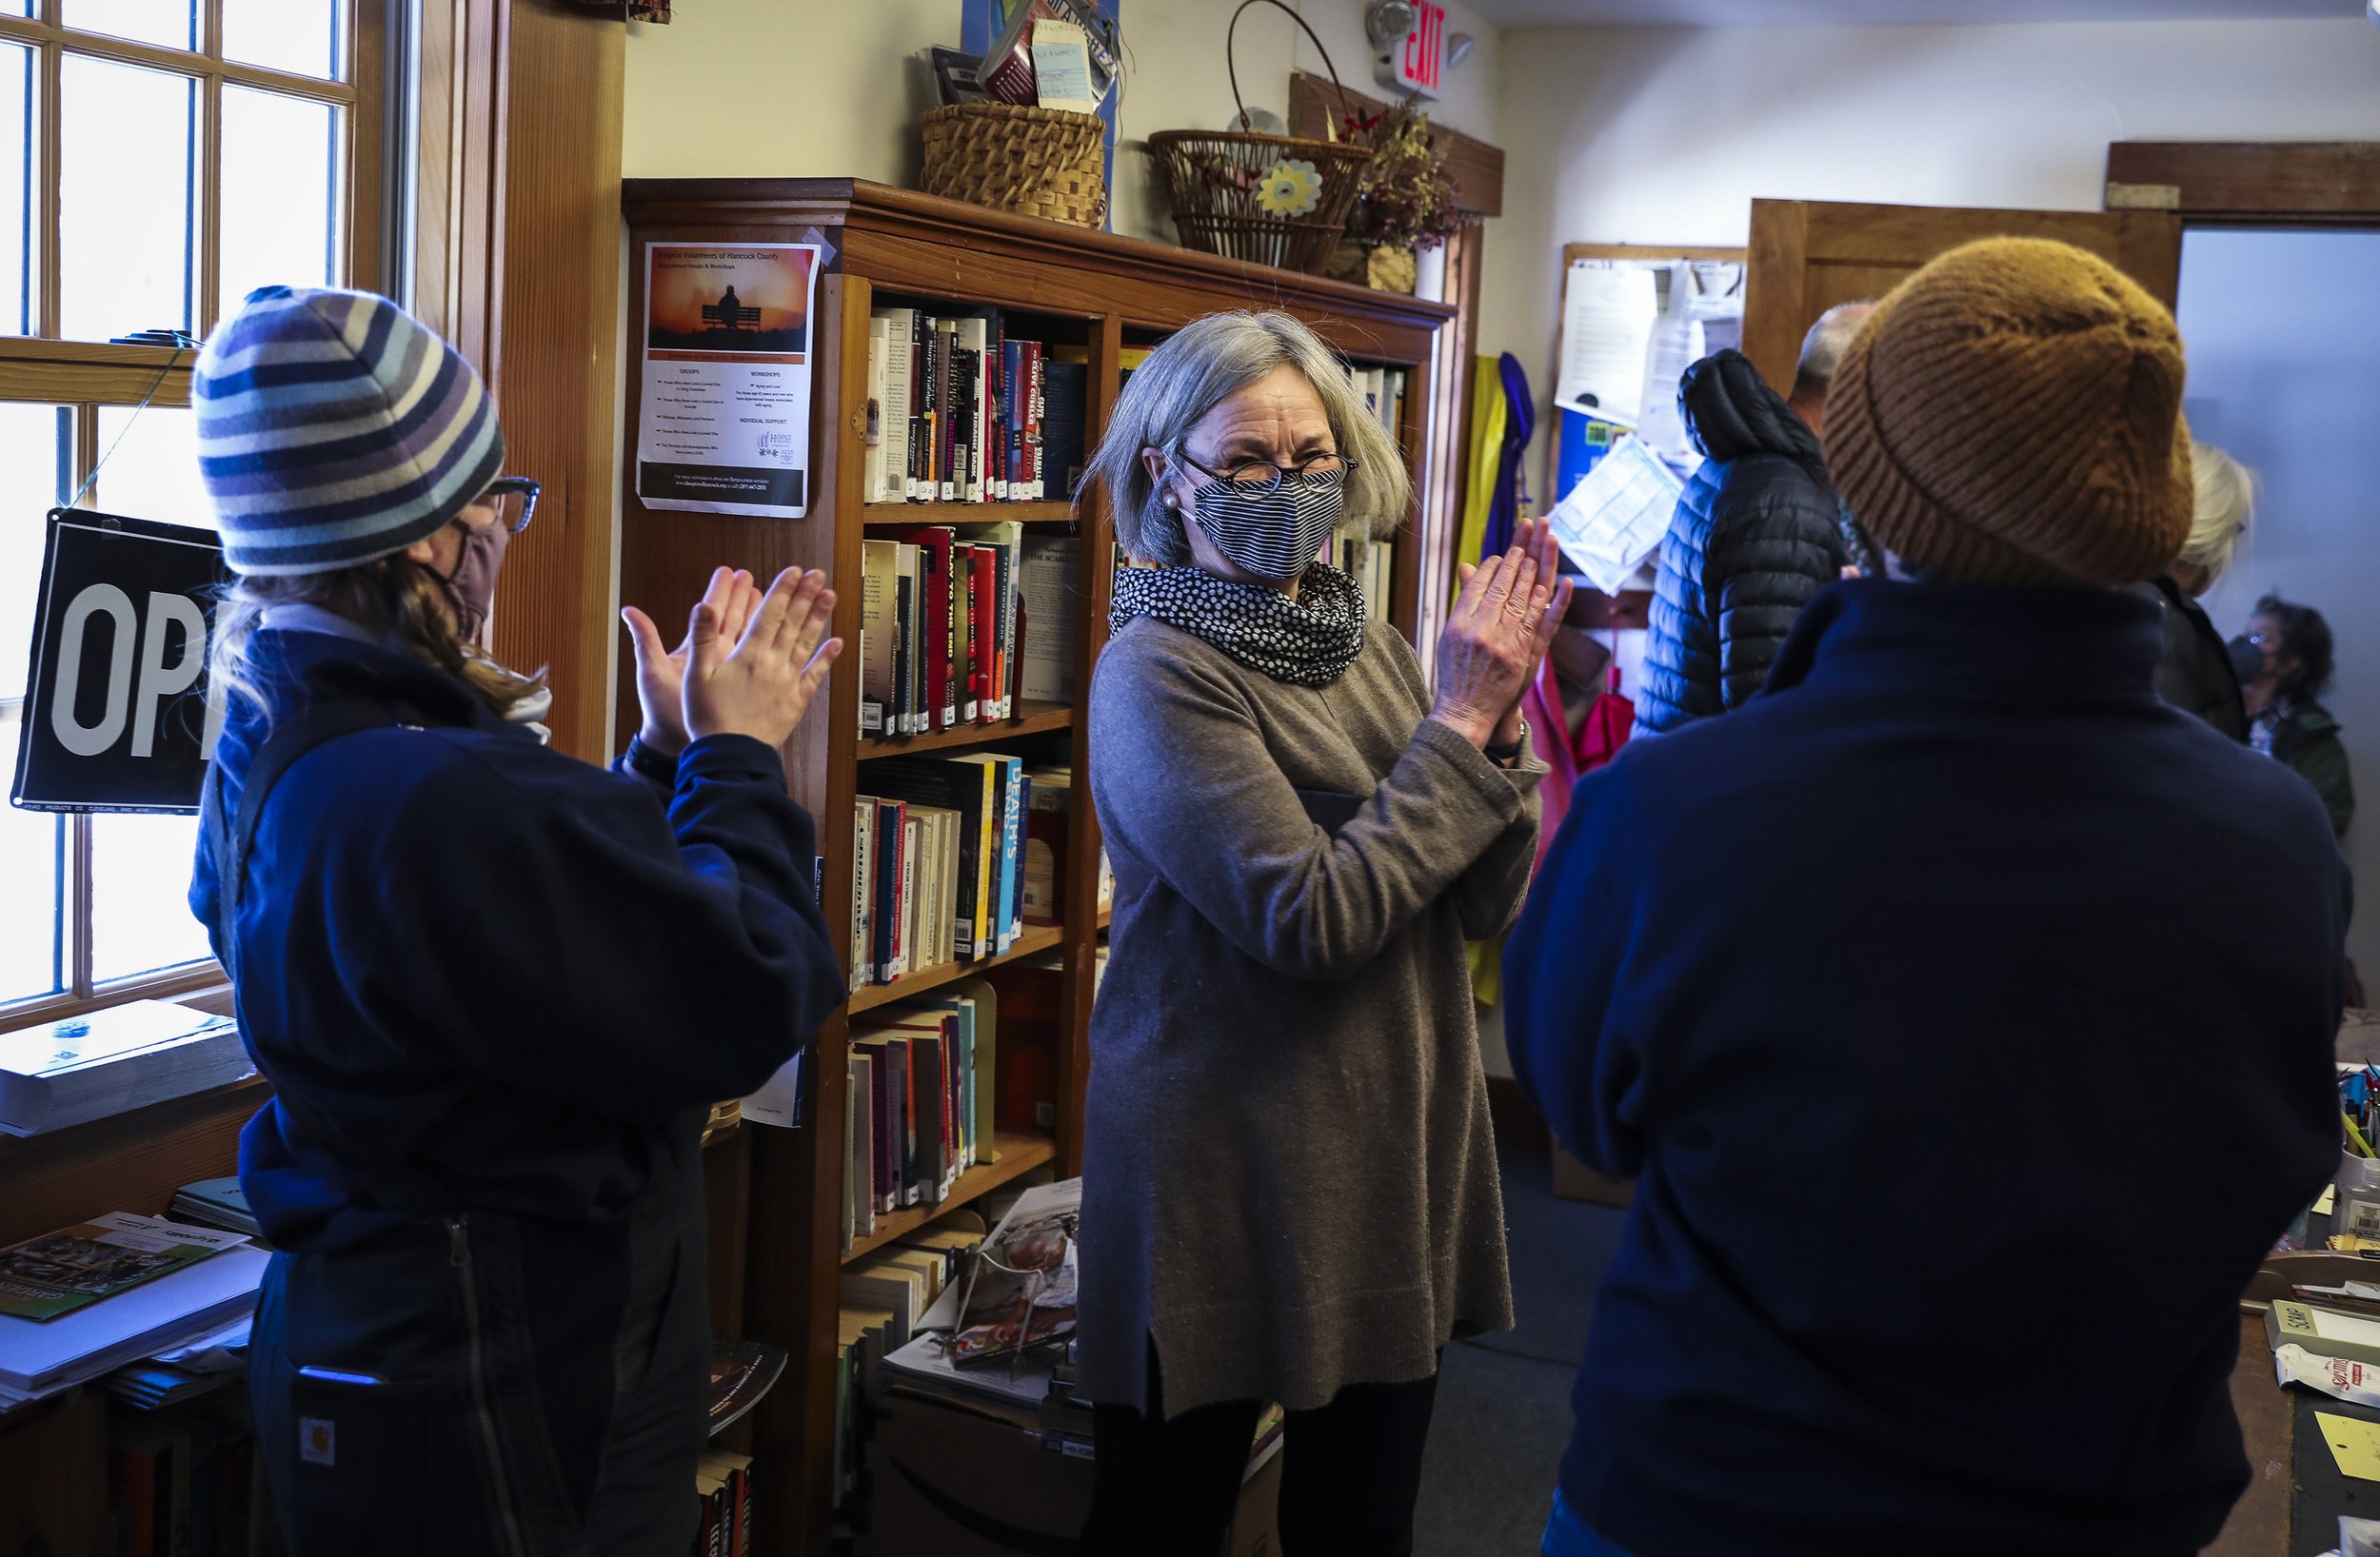  Chief of Cranberry Isles Rescue Service Katelyn Damon, left, Islesford resident Barb Fernald. center, and Assistant Chief of Cranberry Isles Rescue Service Mary Schuch applaud Seacoast Mission staff after they vaccinated islanders on Isleford at the